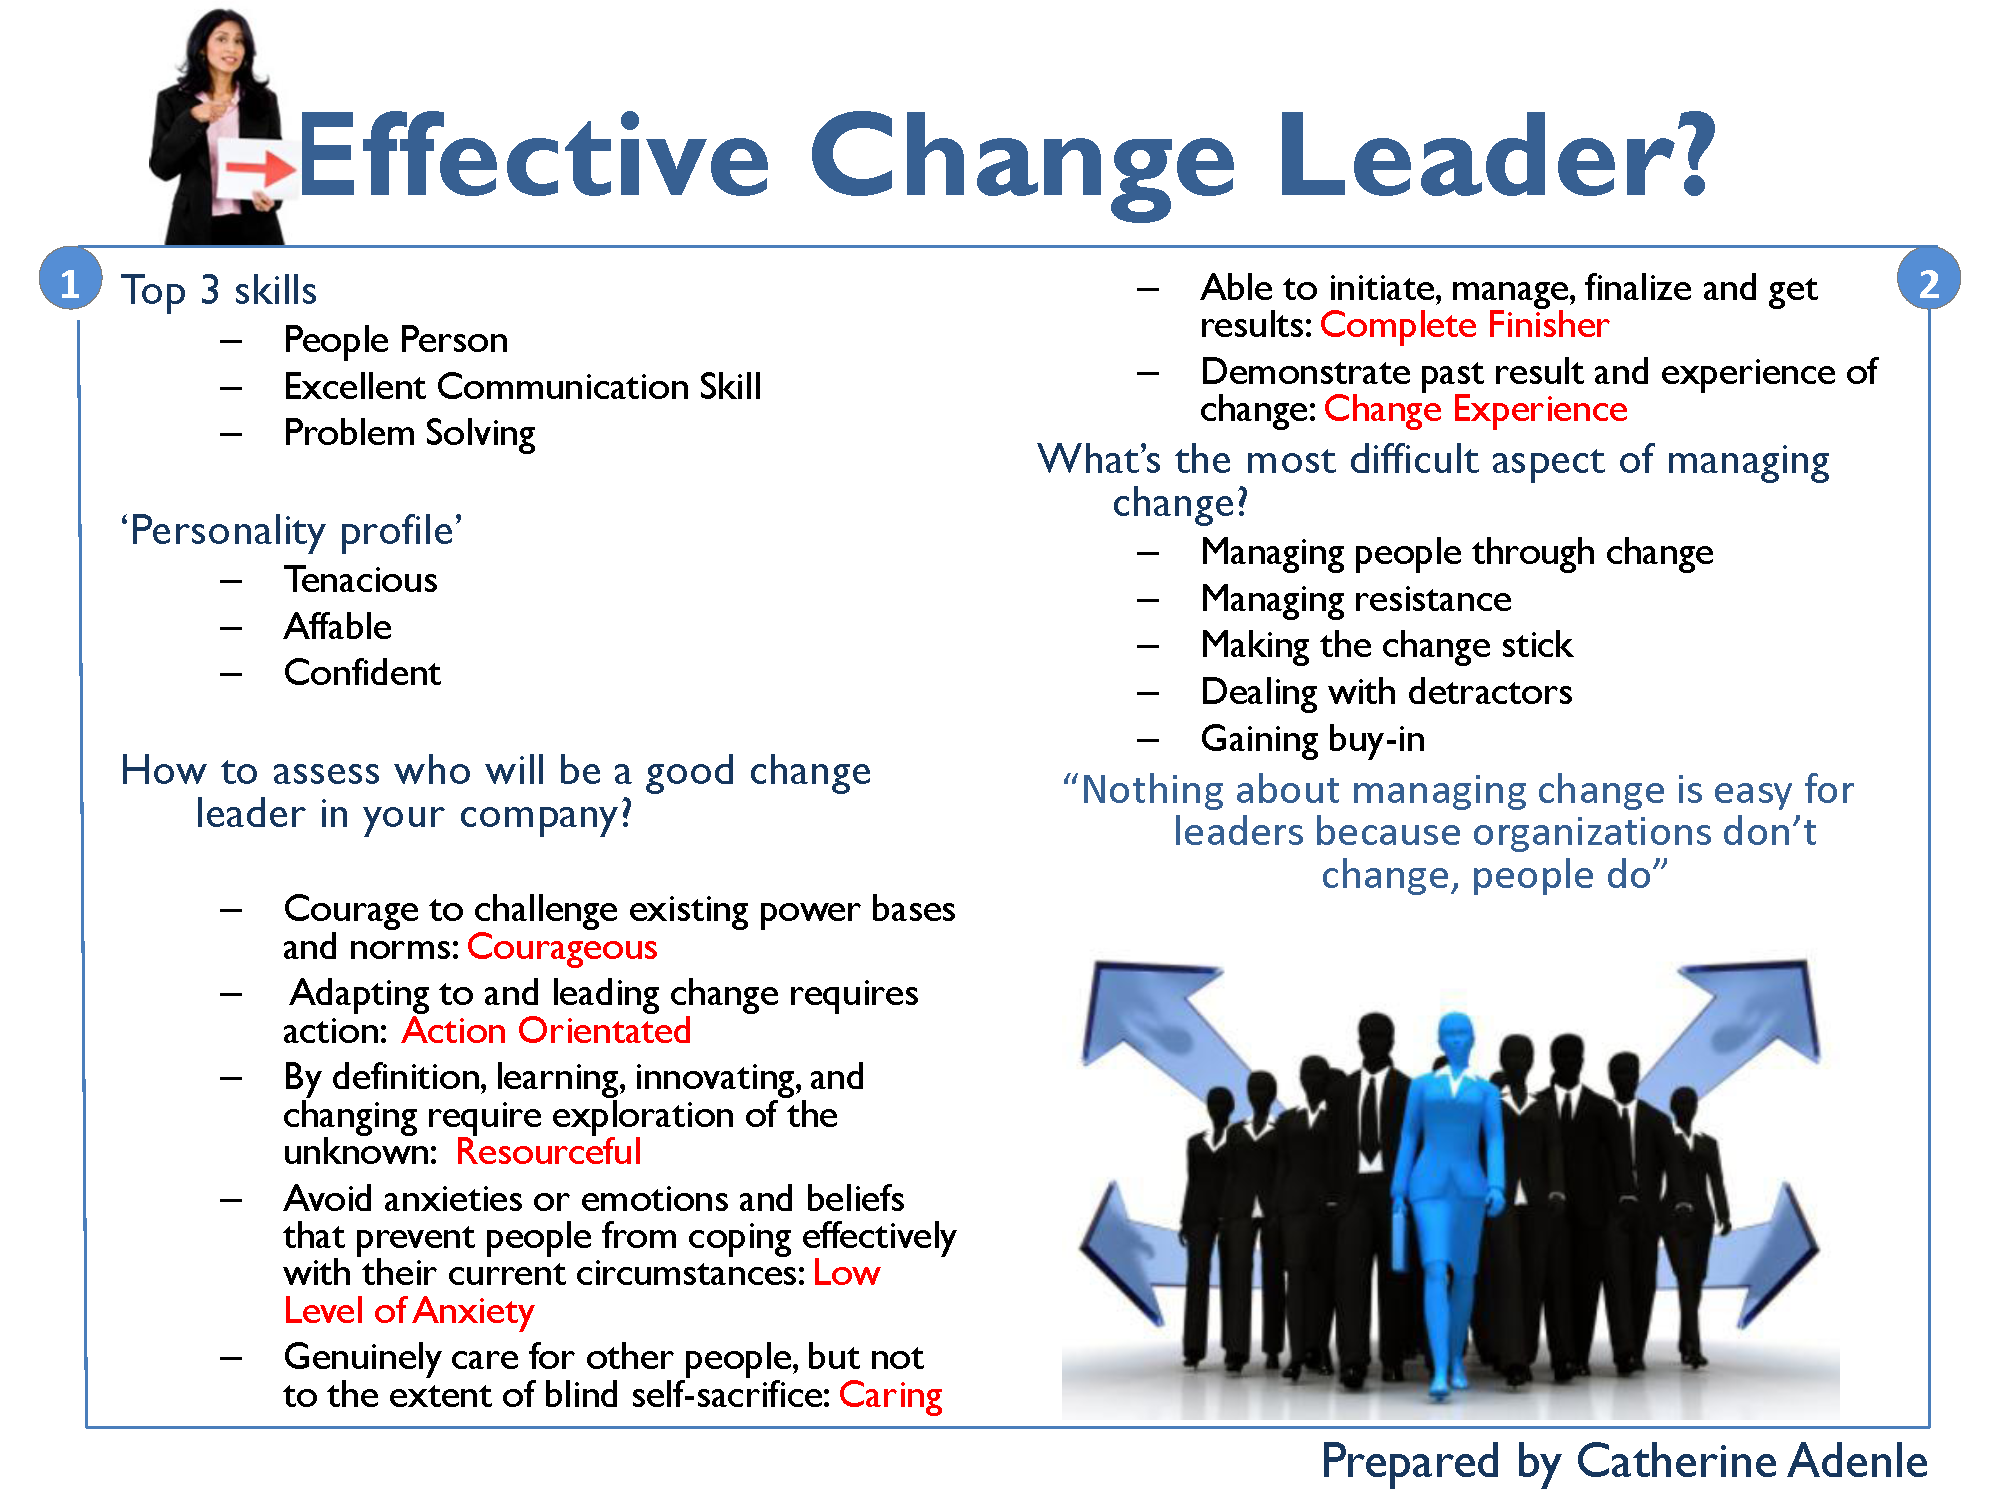 Want an effective change leader?